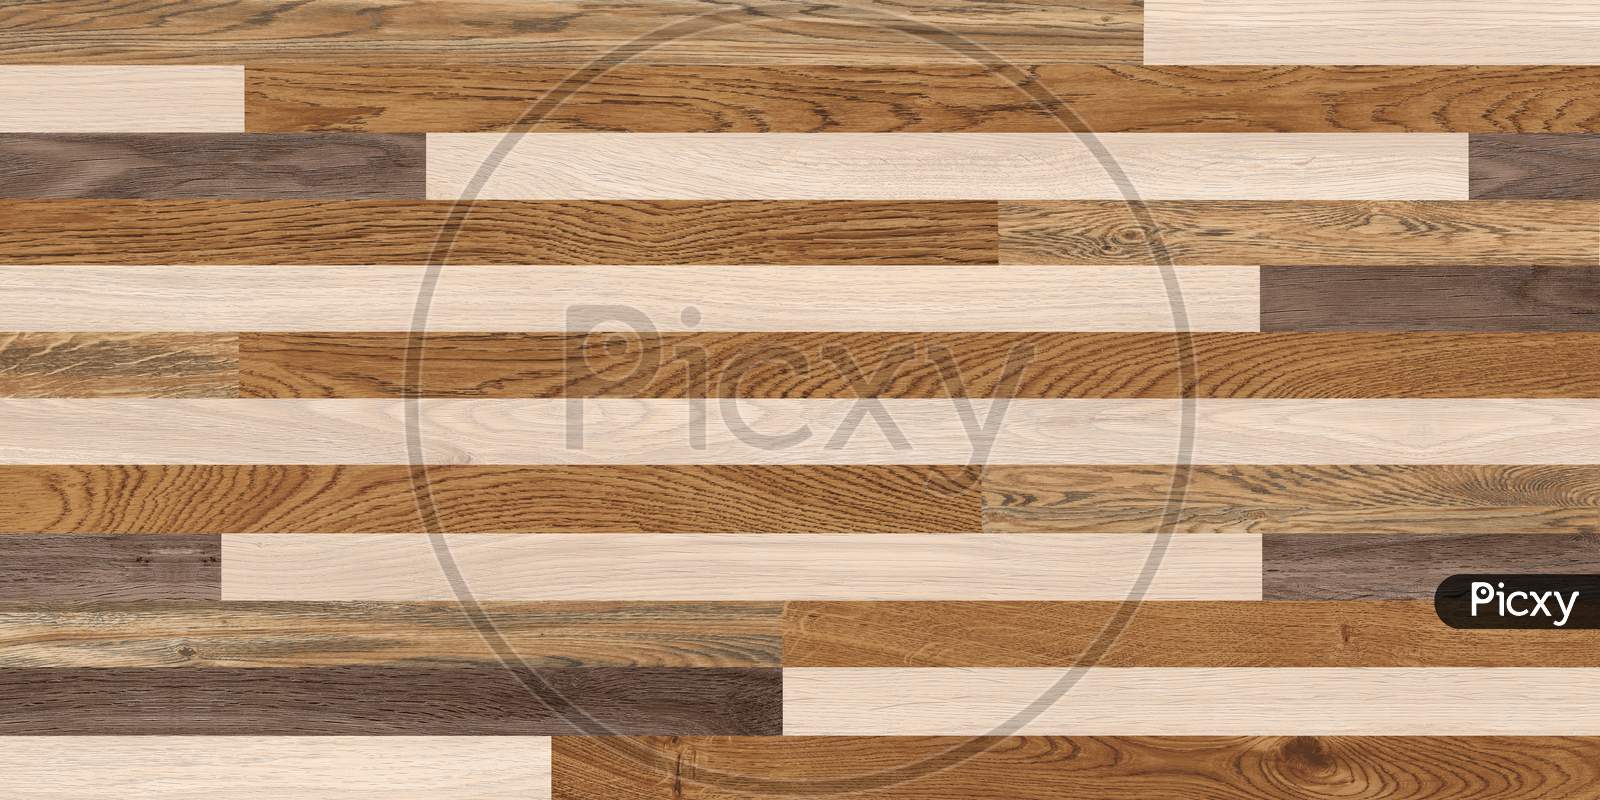 Wooden Striped Decorative Floor And Wall Pattern Tile.